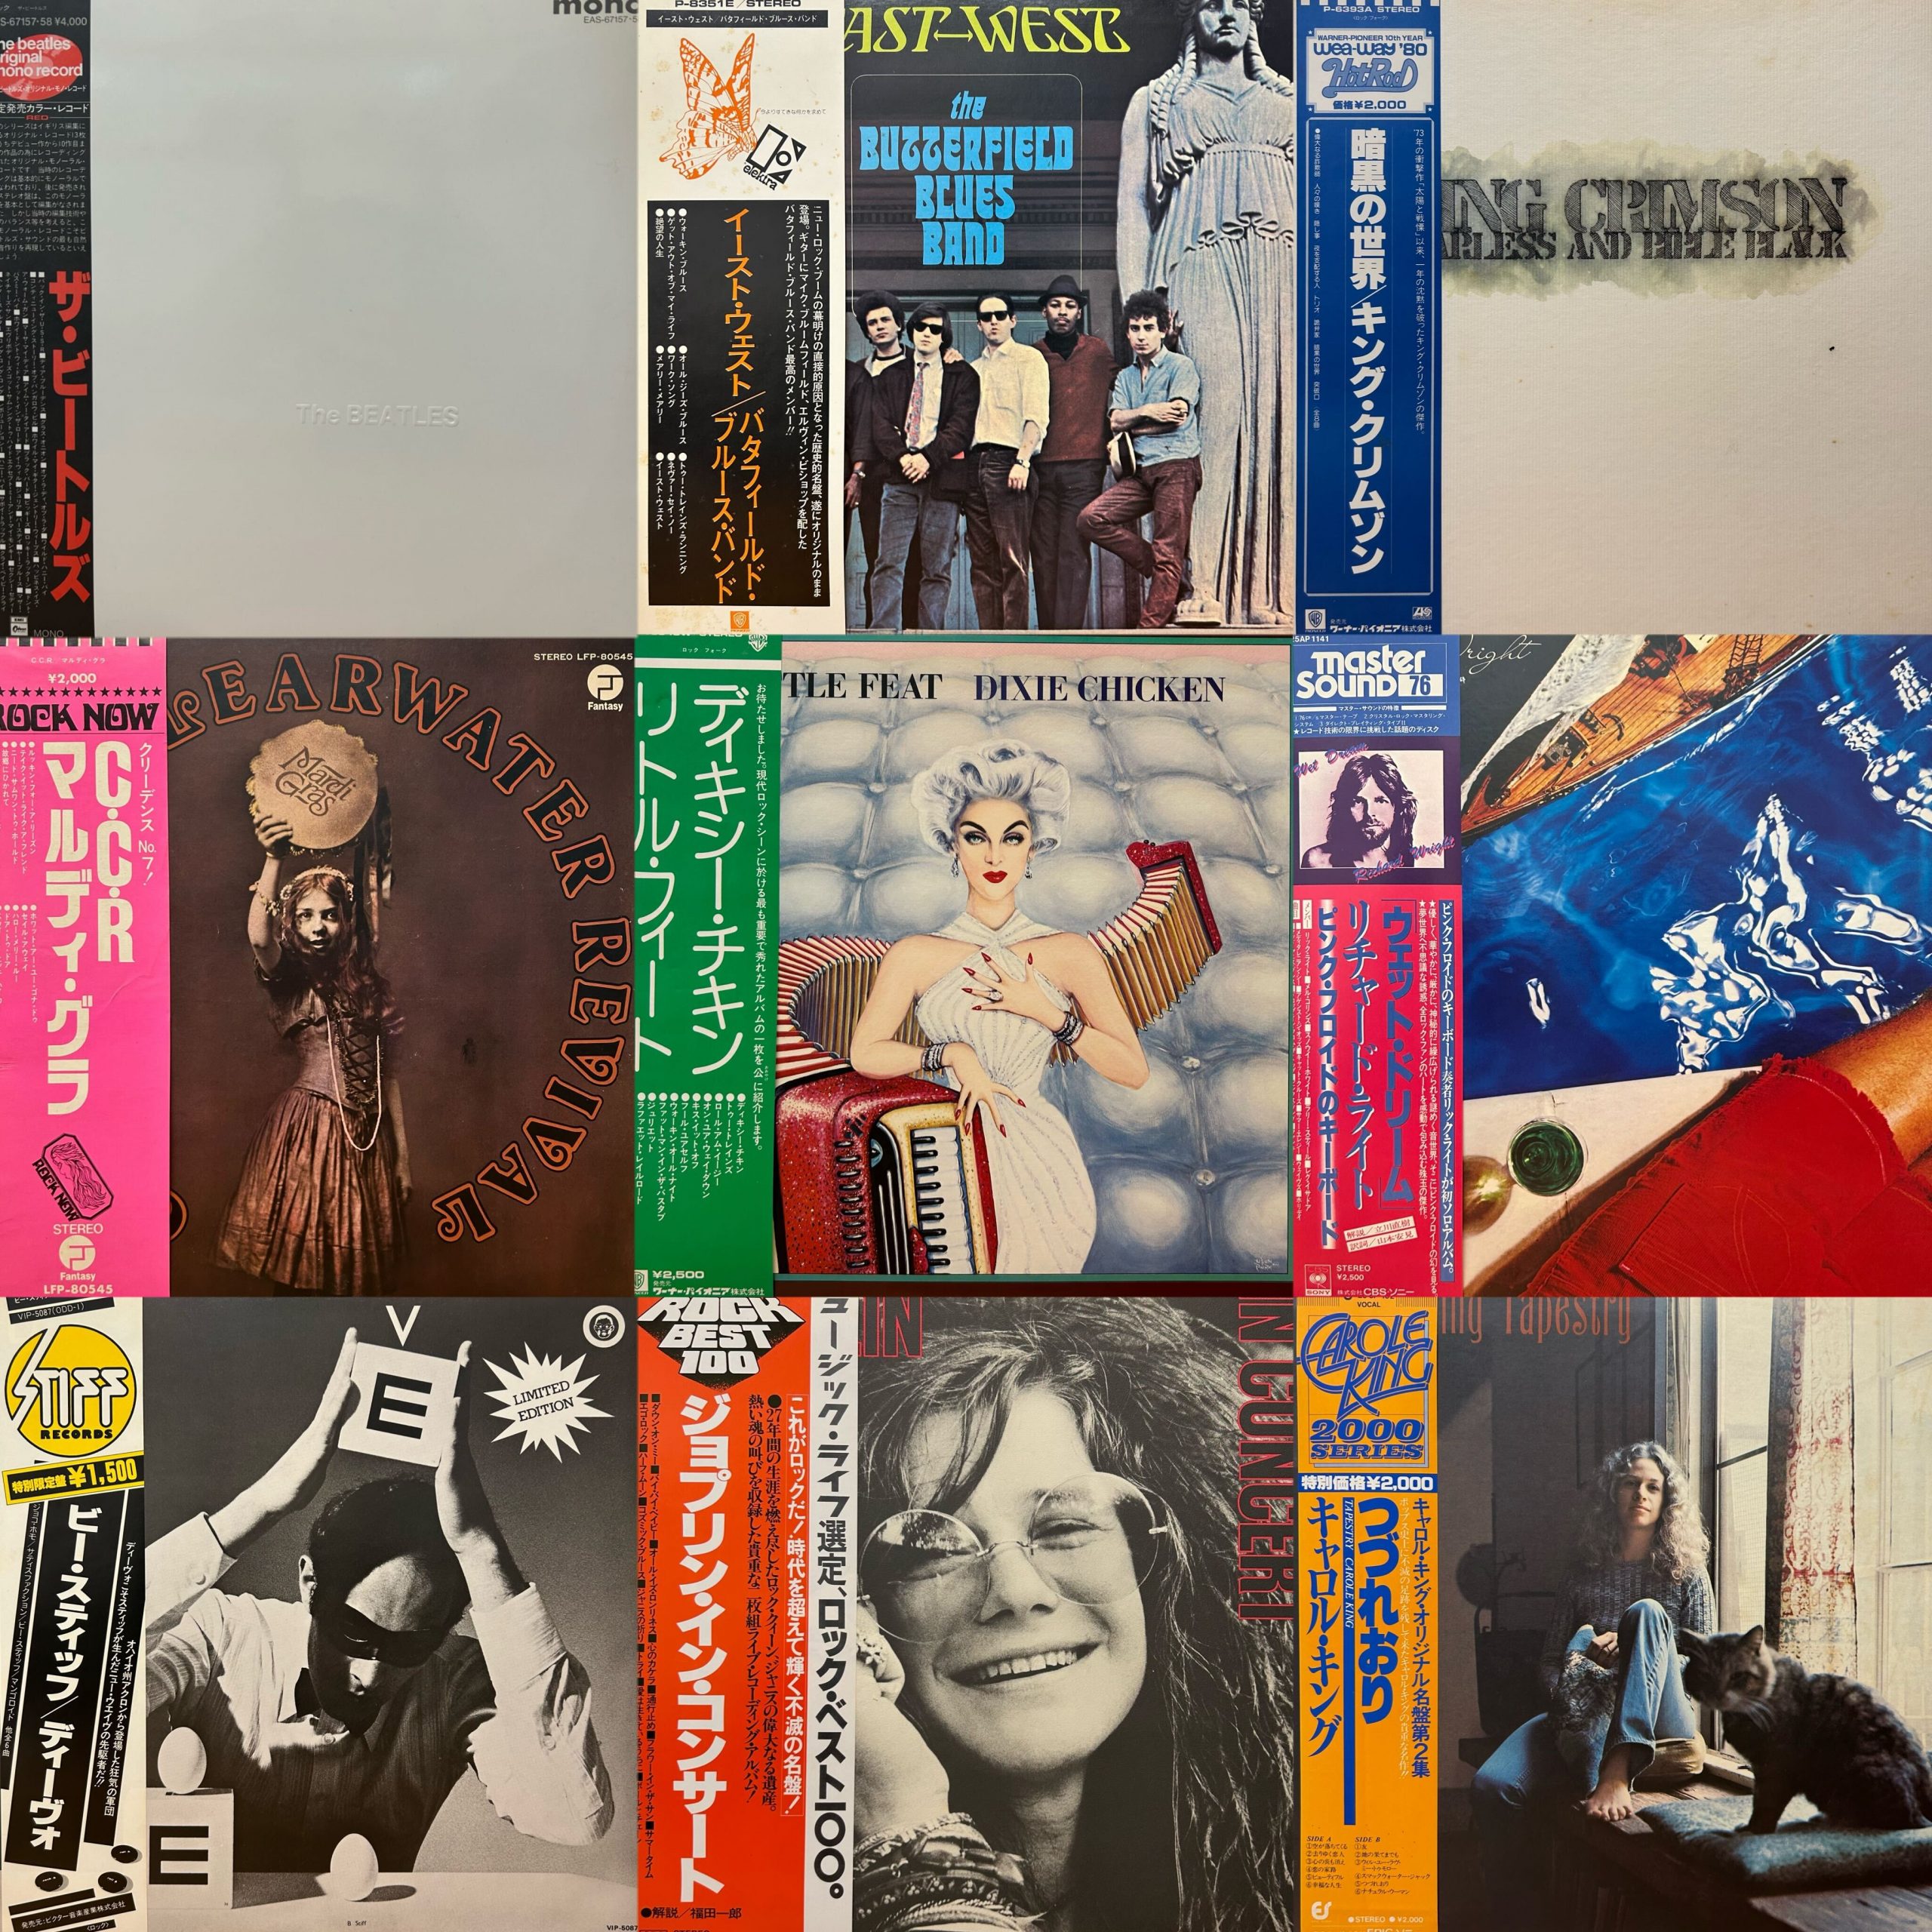 2022/10/05(WED) ～10/07(FRI) JAPANESE LP SALE – General Record Store